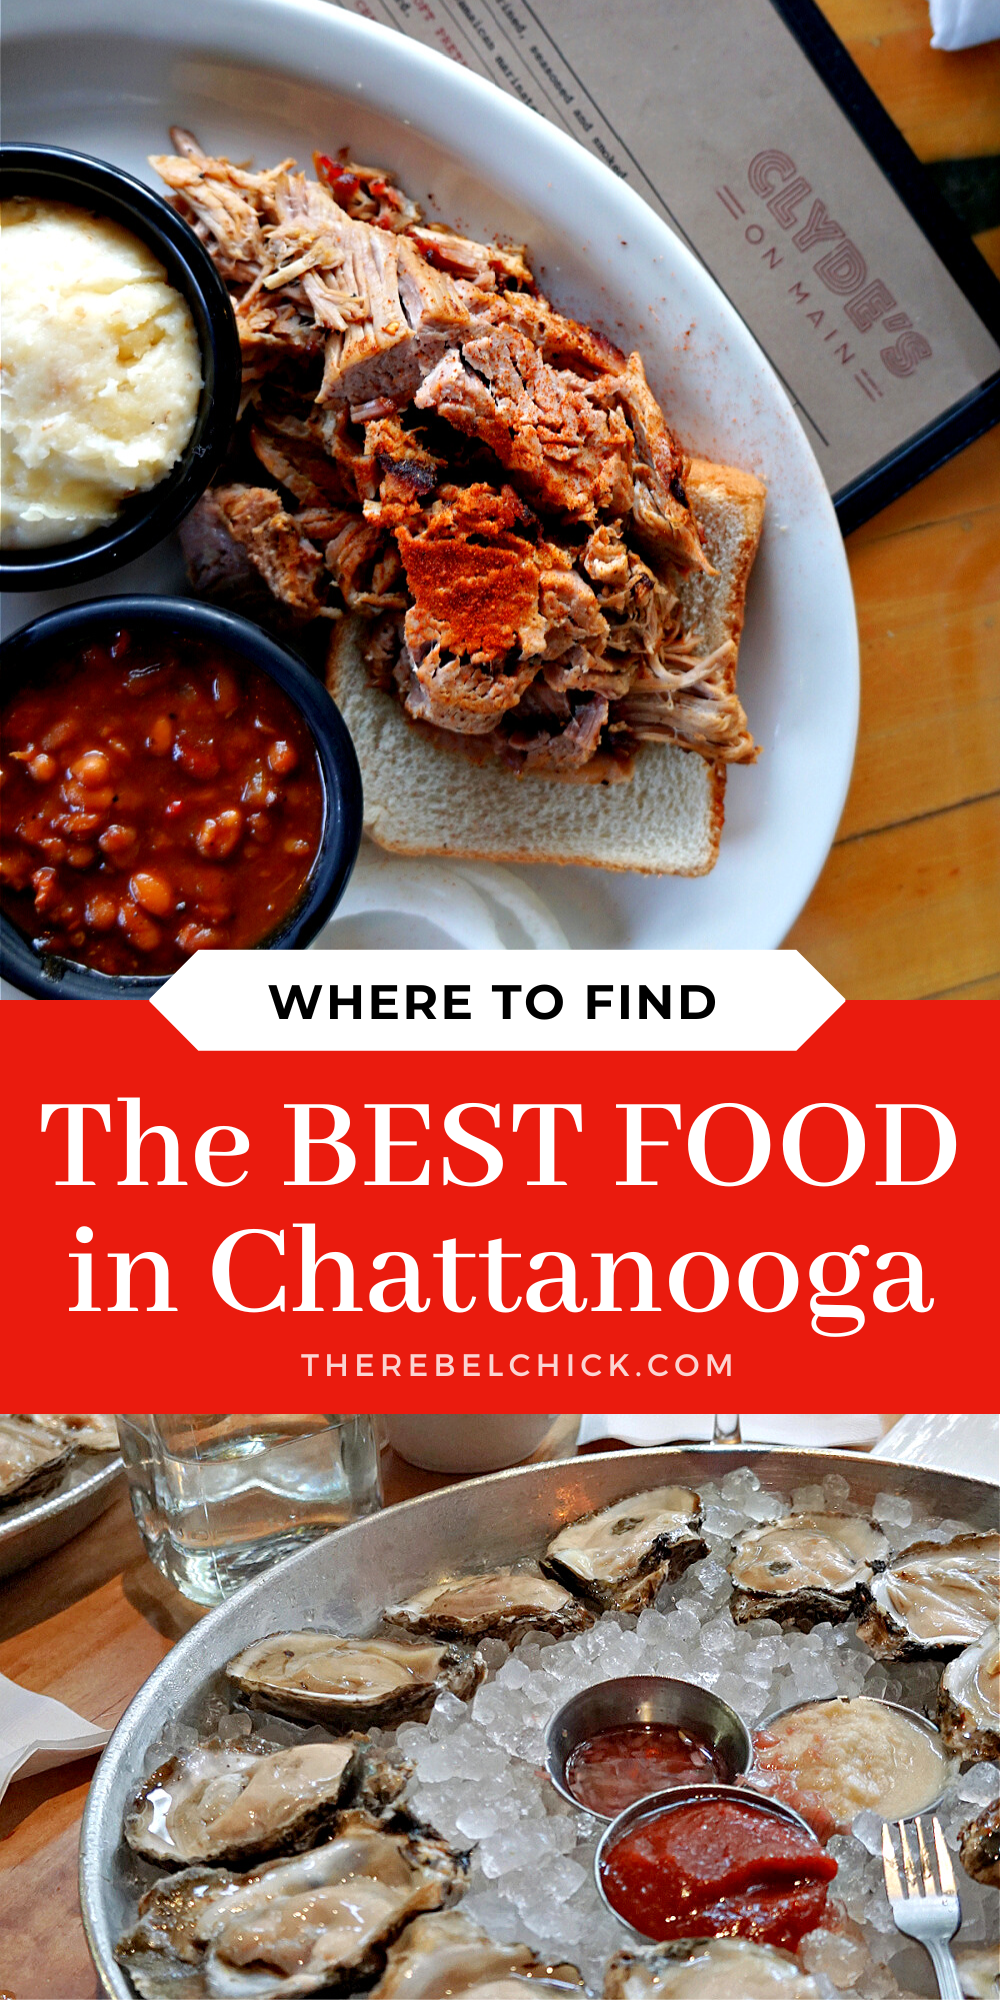 A Foodie's Guide: Where to find the best food in Chattanooga